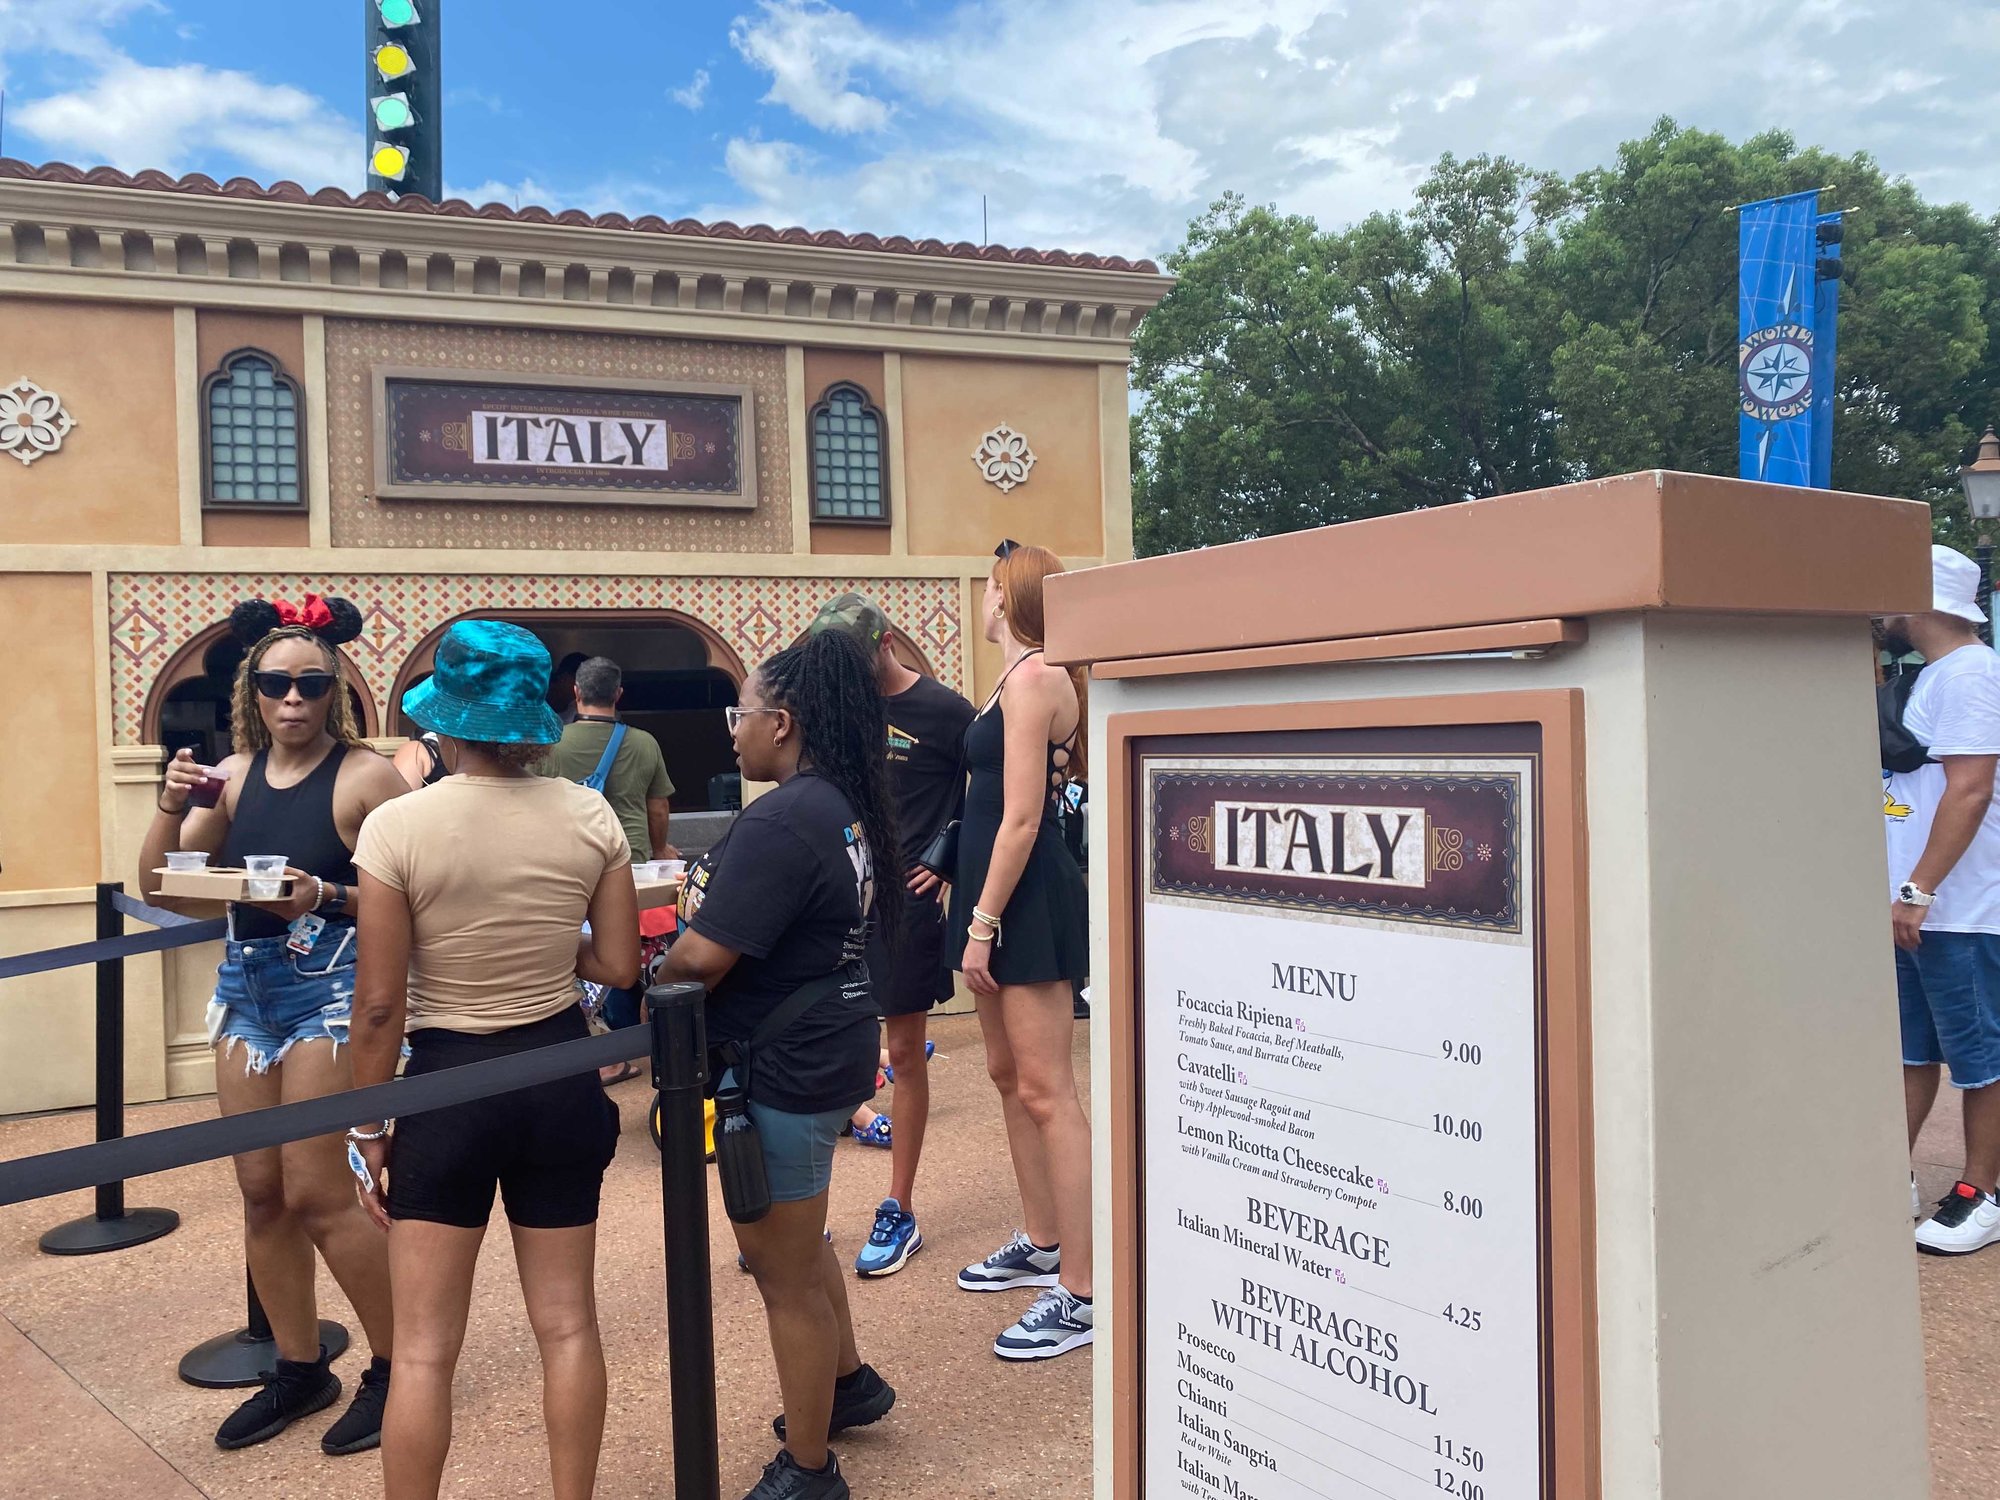 italy booth with line of people and outdoor menu